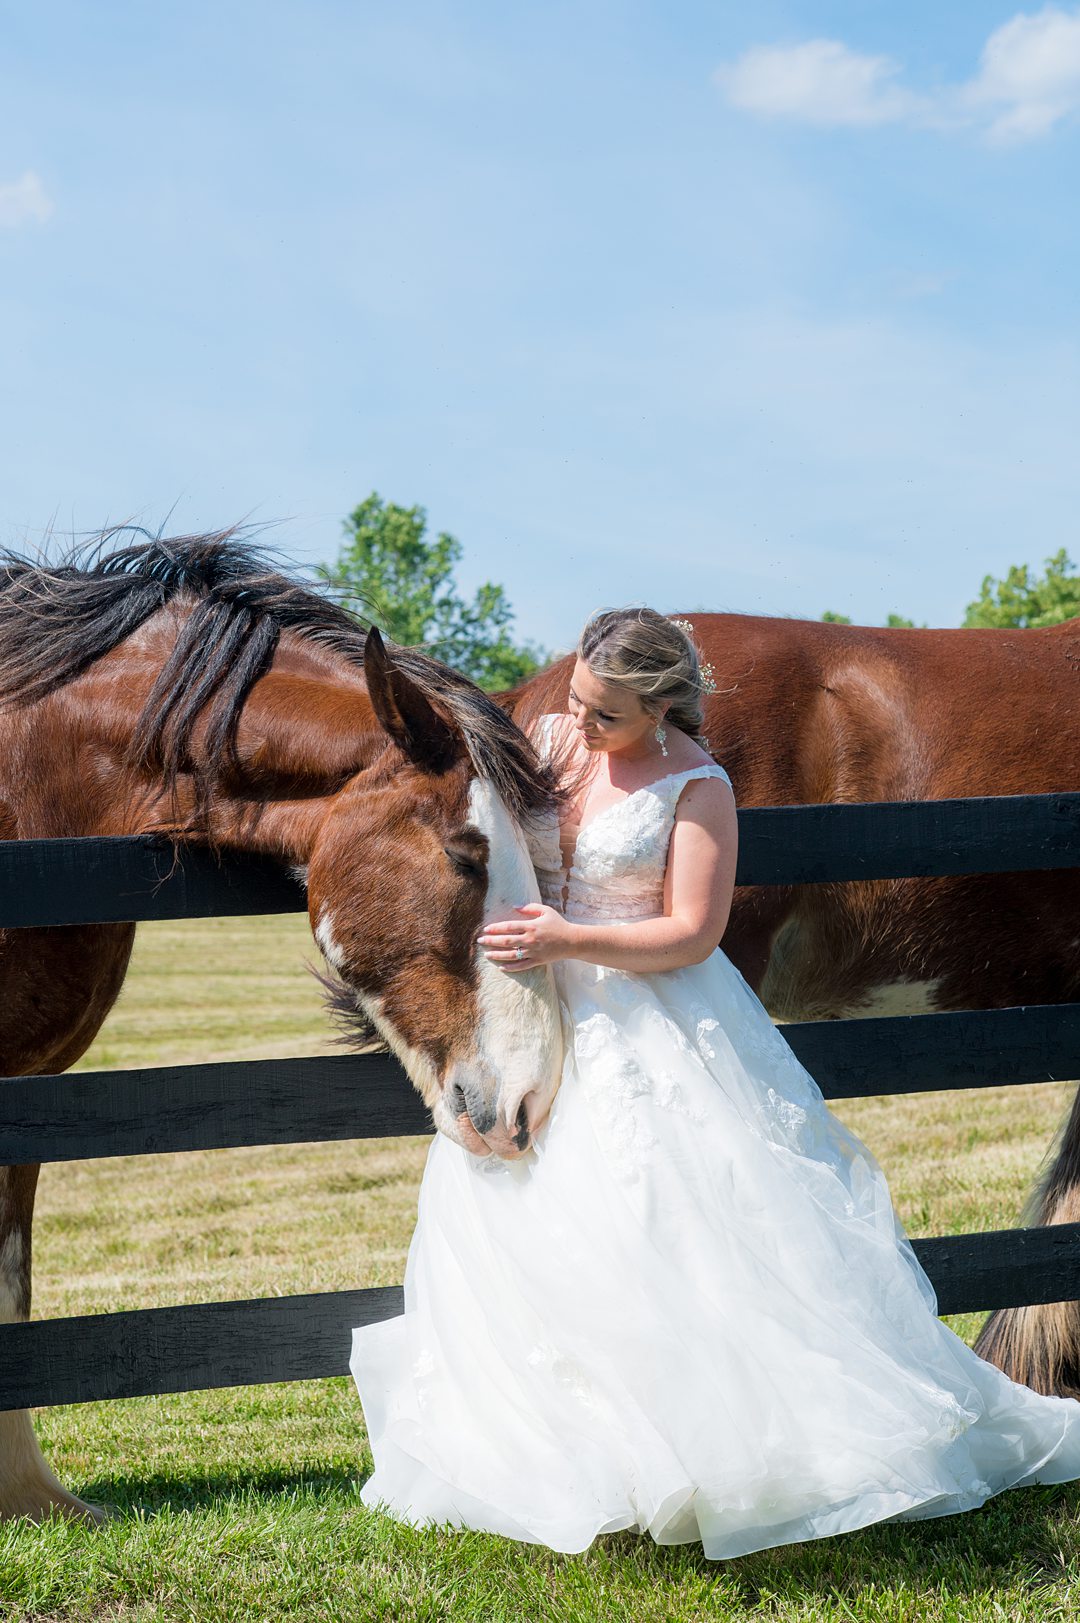 The bride enjoyed The Lodge at Mount Ida for her small wedding in Charlottesville Virginia partially because of the Clydesdale horses on property. Photos by Mikkel Paige Photography.